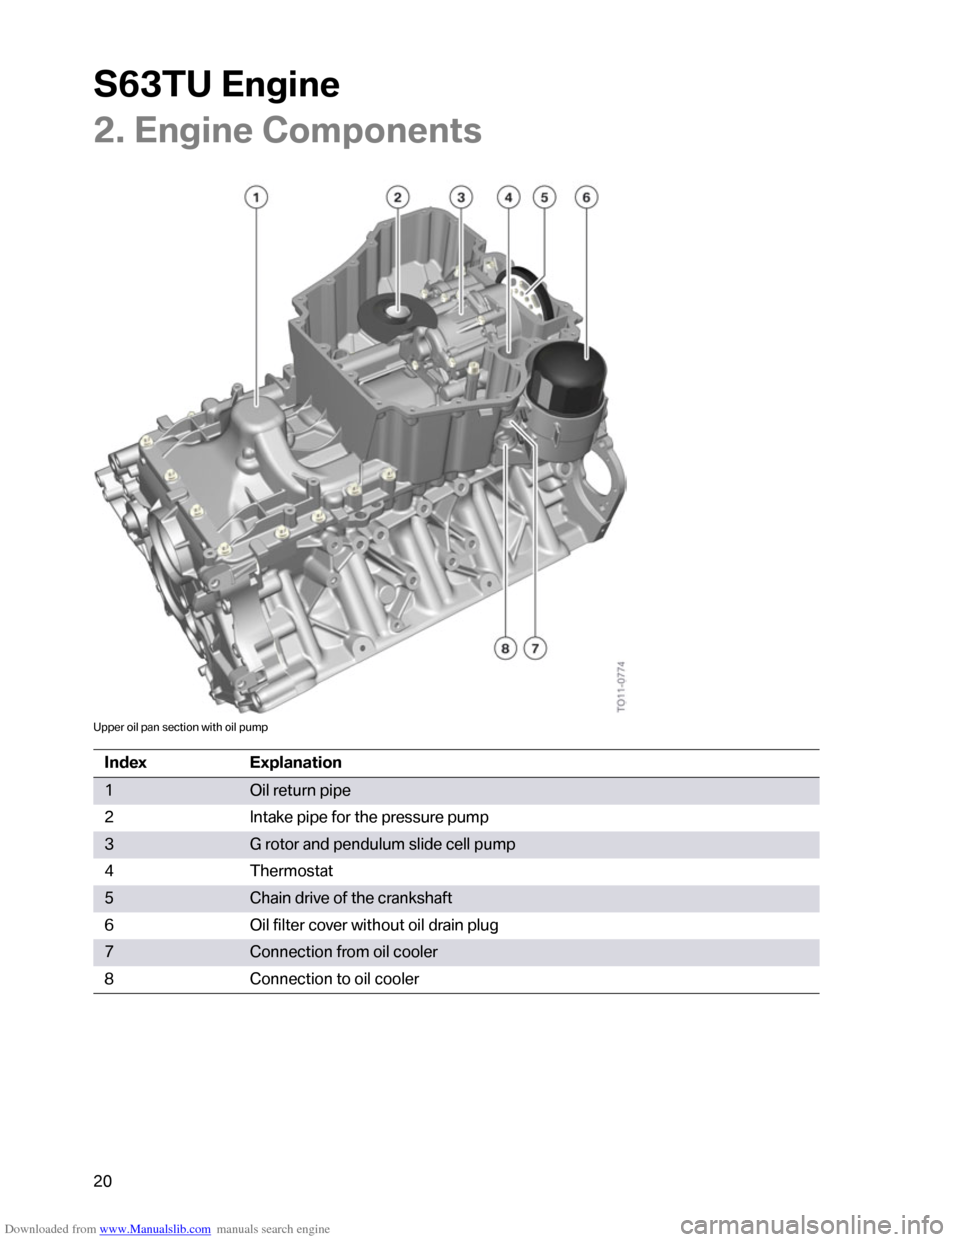 BMW M6 2012 F12 S63TU Engine Technical Training Manual Downloaded from www.Manualslib.com manuals search engine �������	�
���
�
�+���	�
���
�
��1�����
�
�
��"
�/�0
�<��������	��������������
�������	�����
�